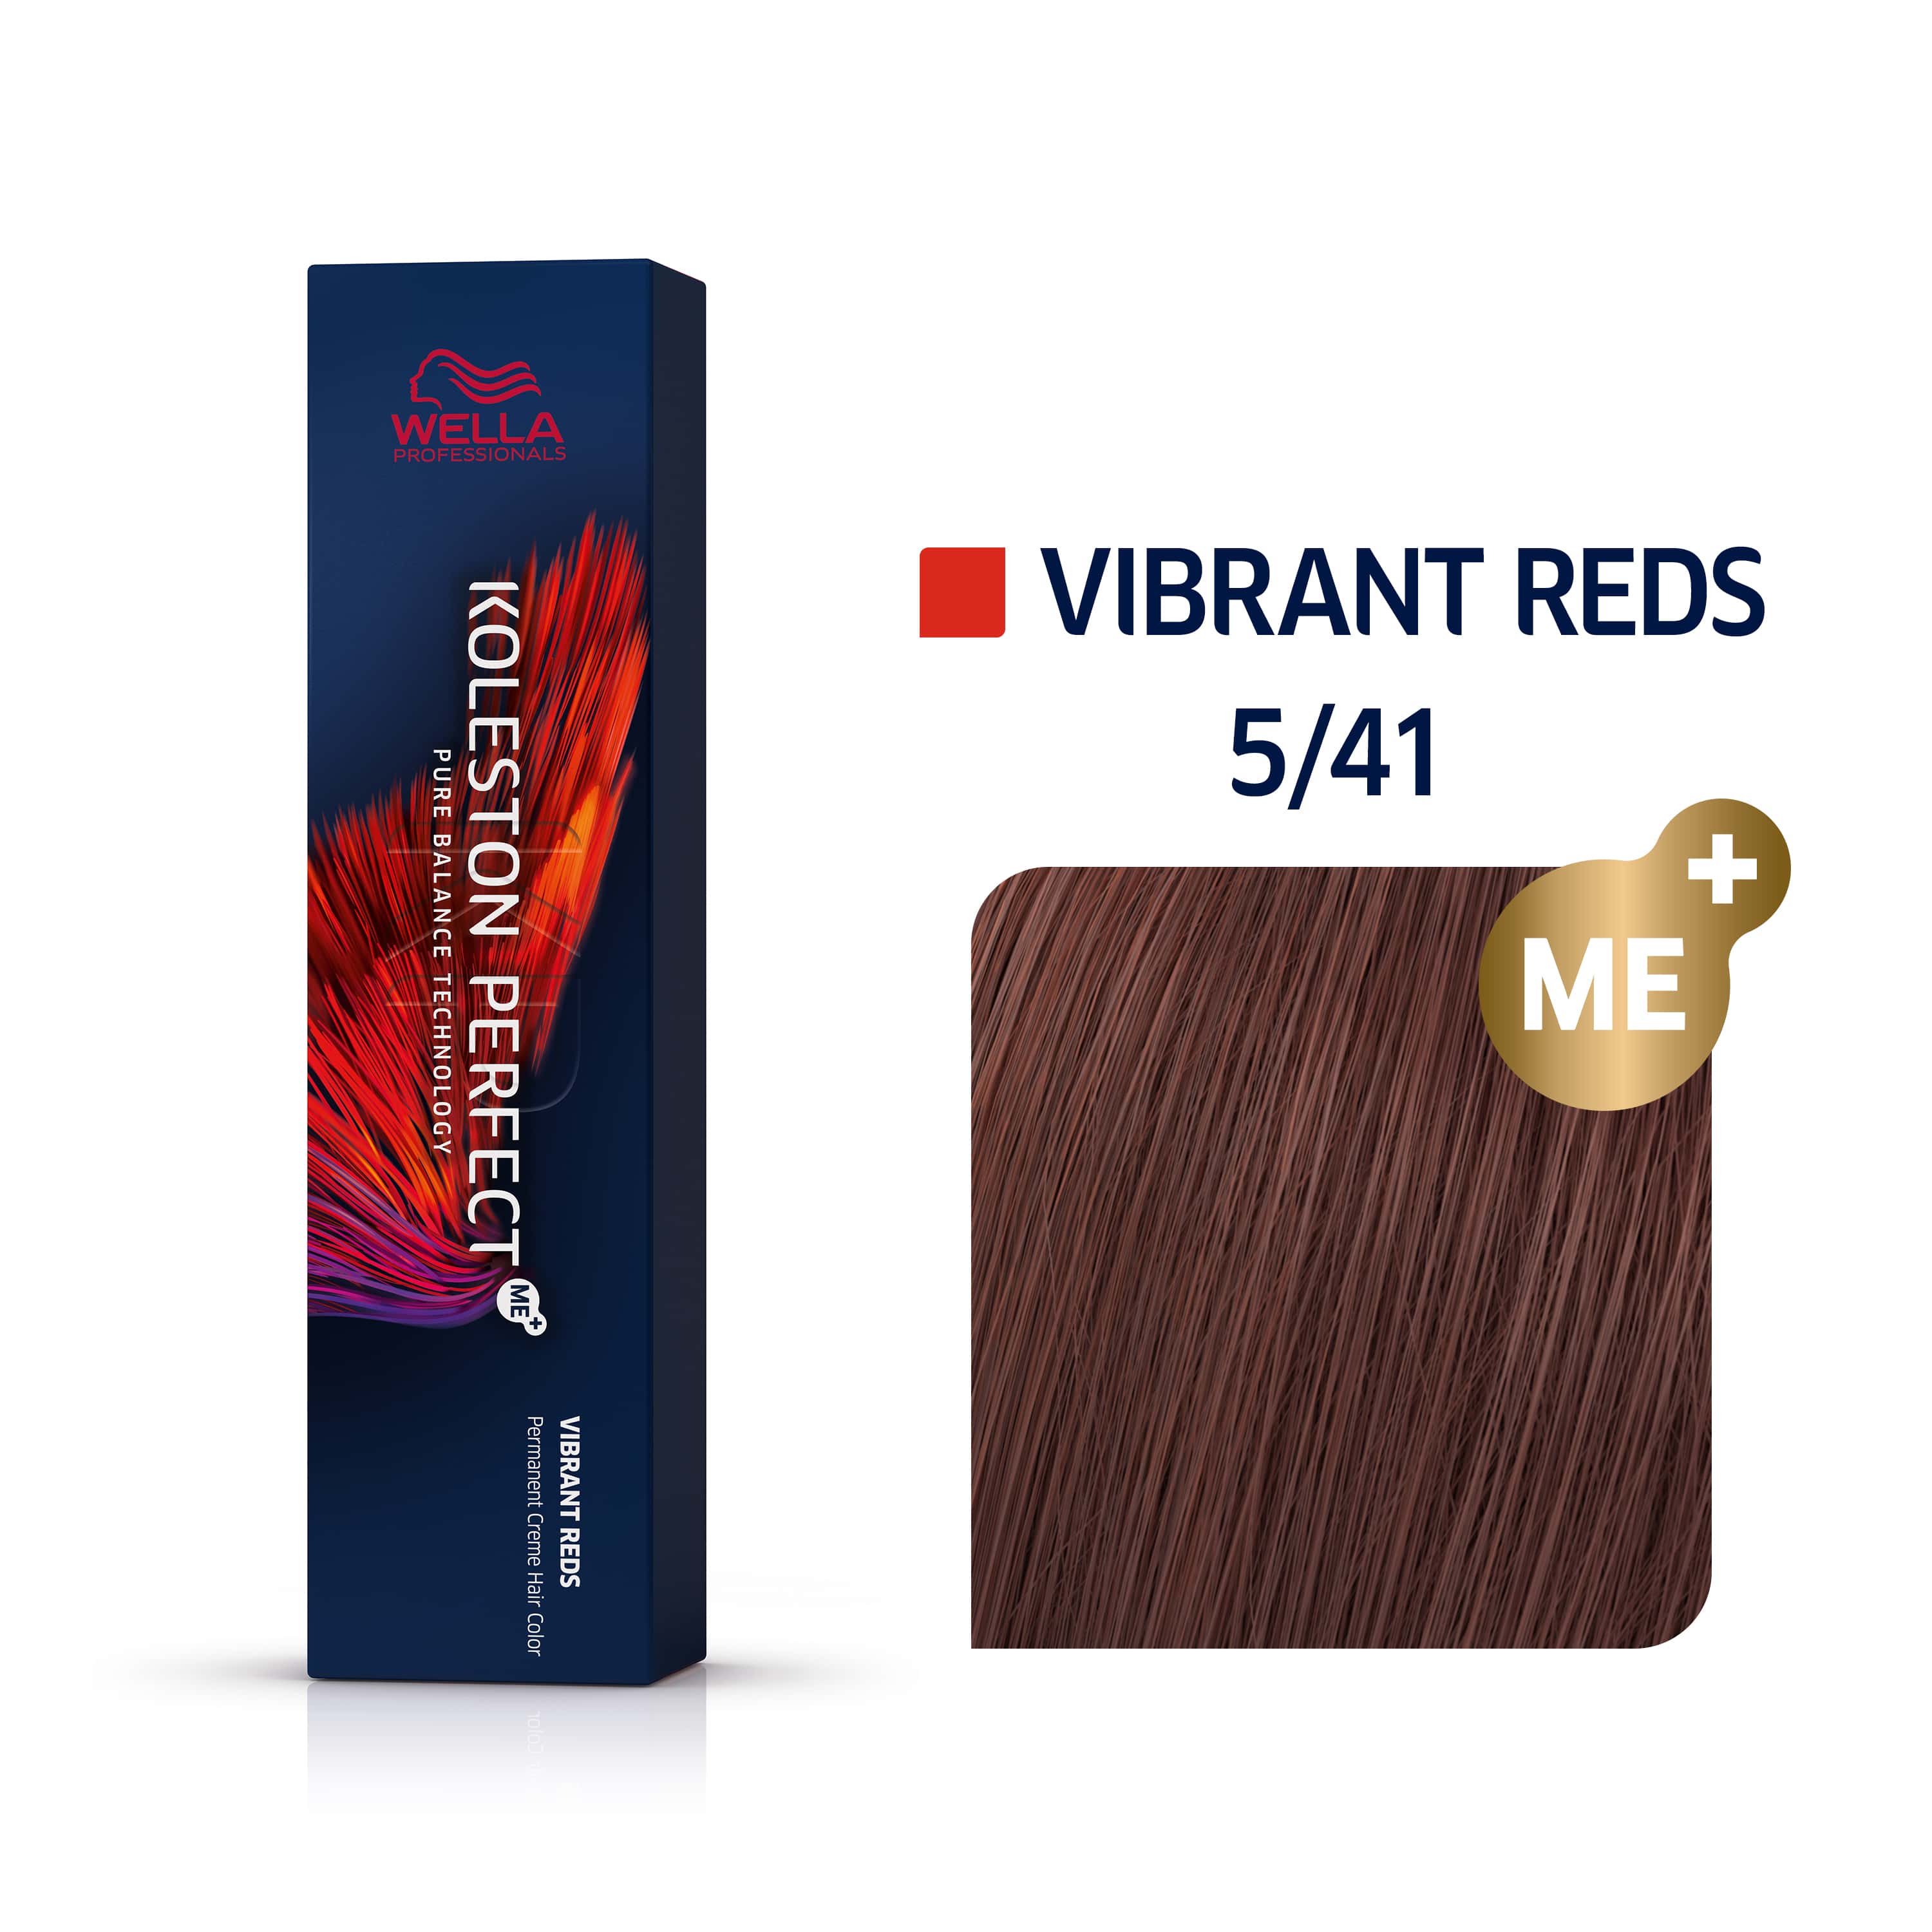 a box of wella vibrant reds hair color